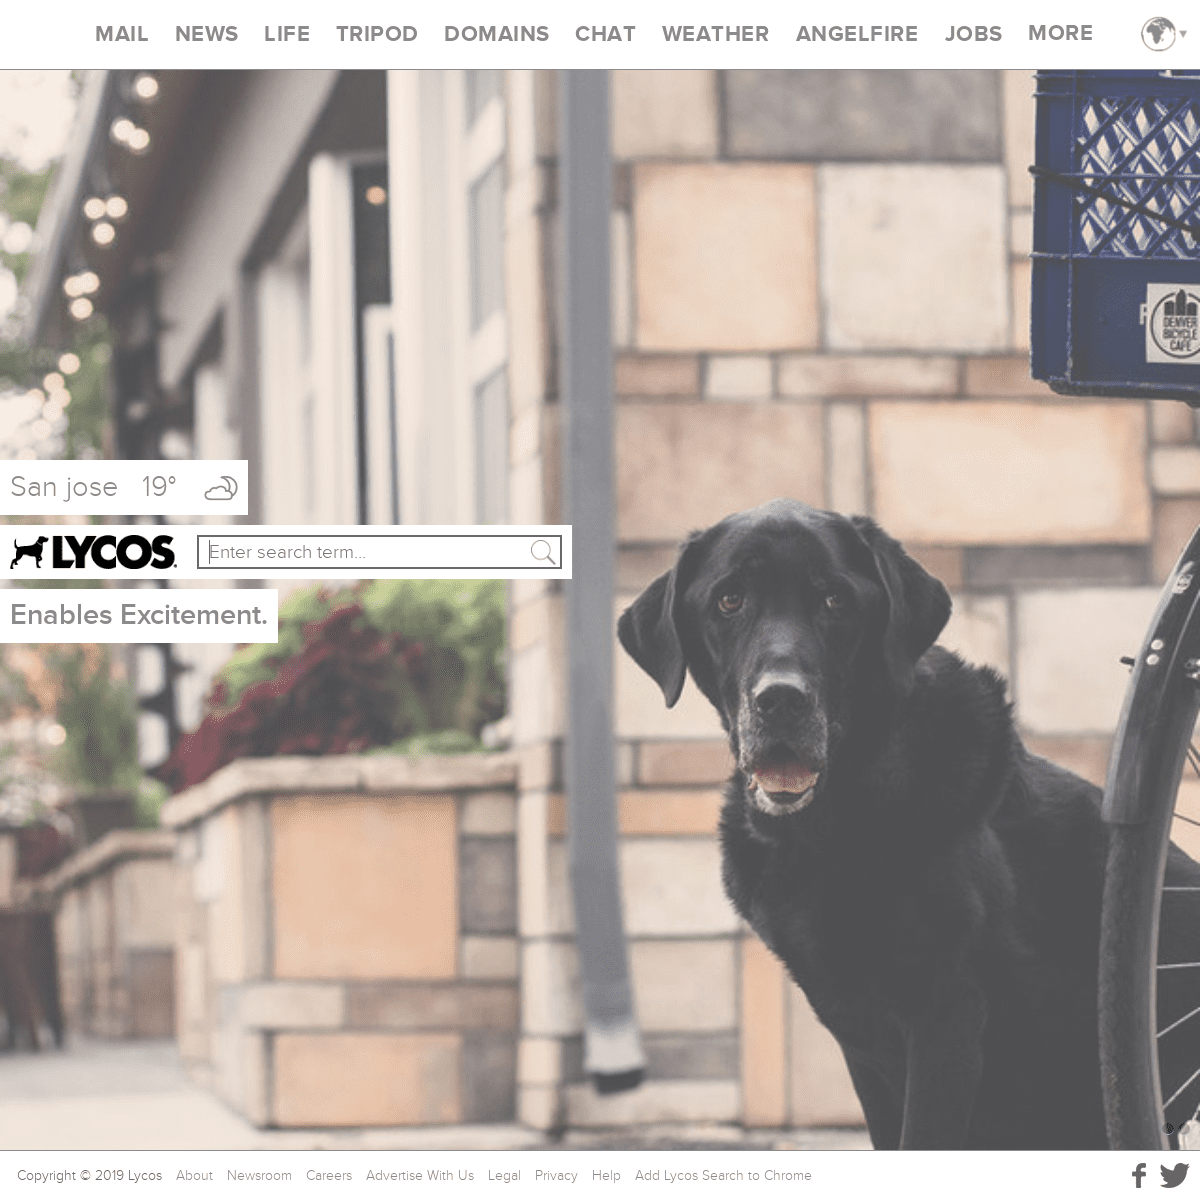 A complete backup of lycos.co.uk